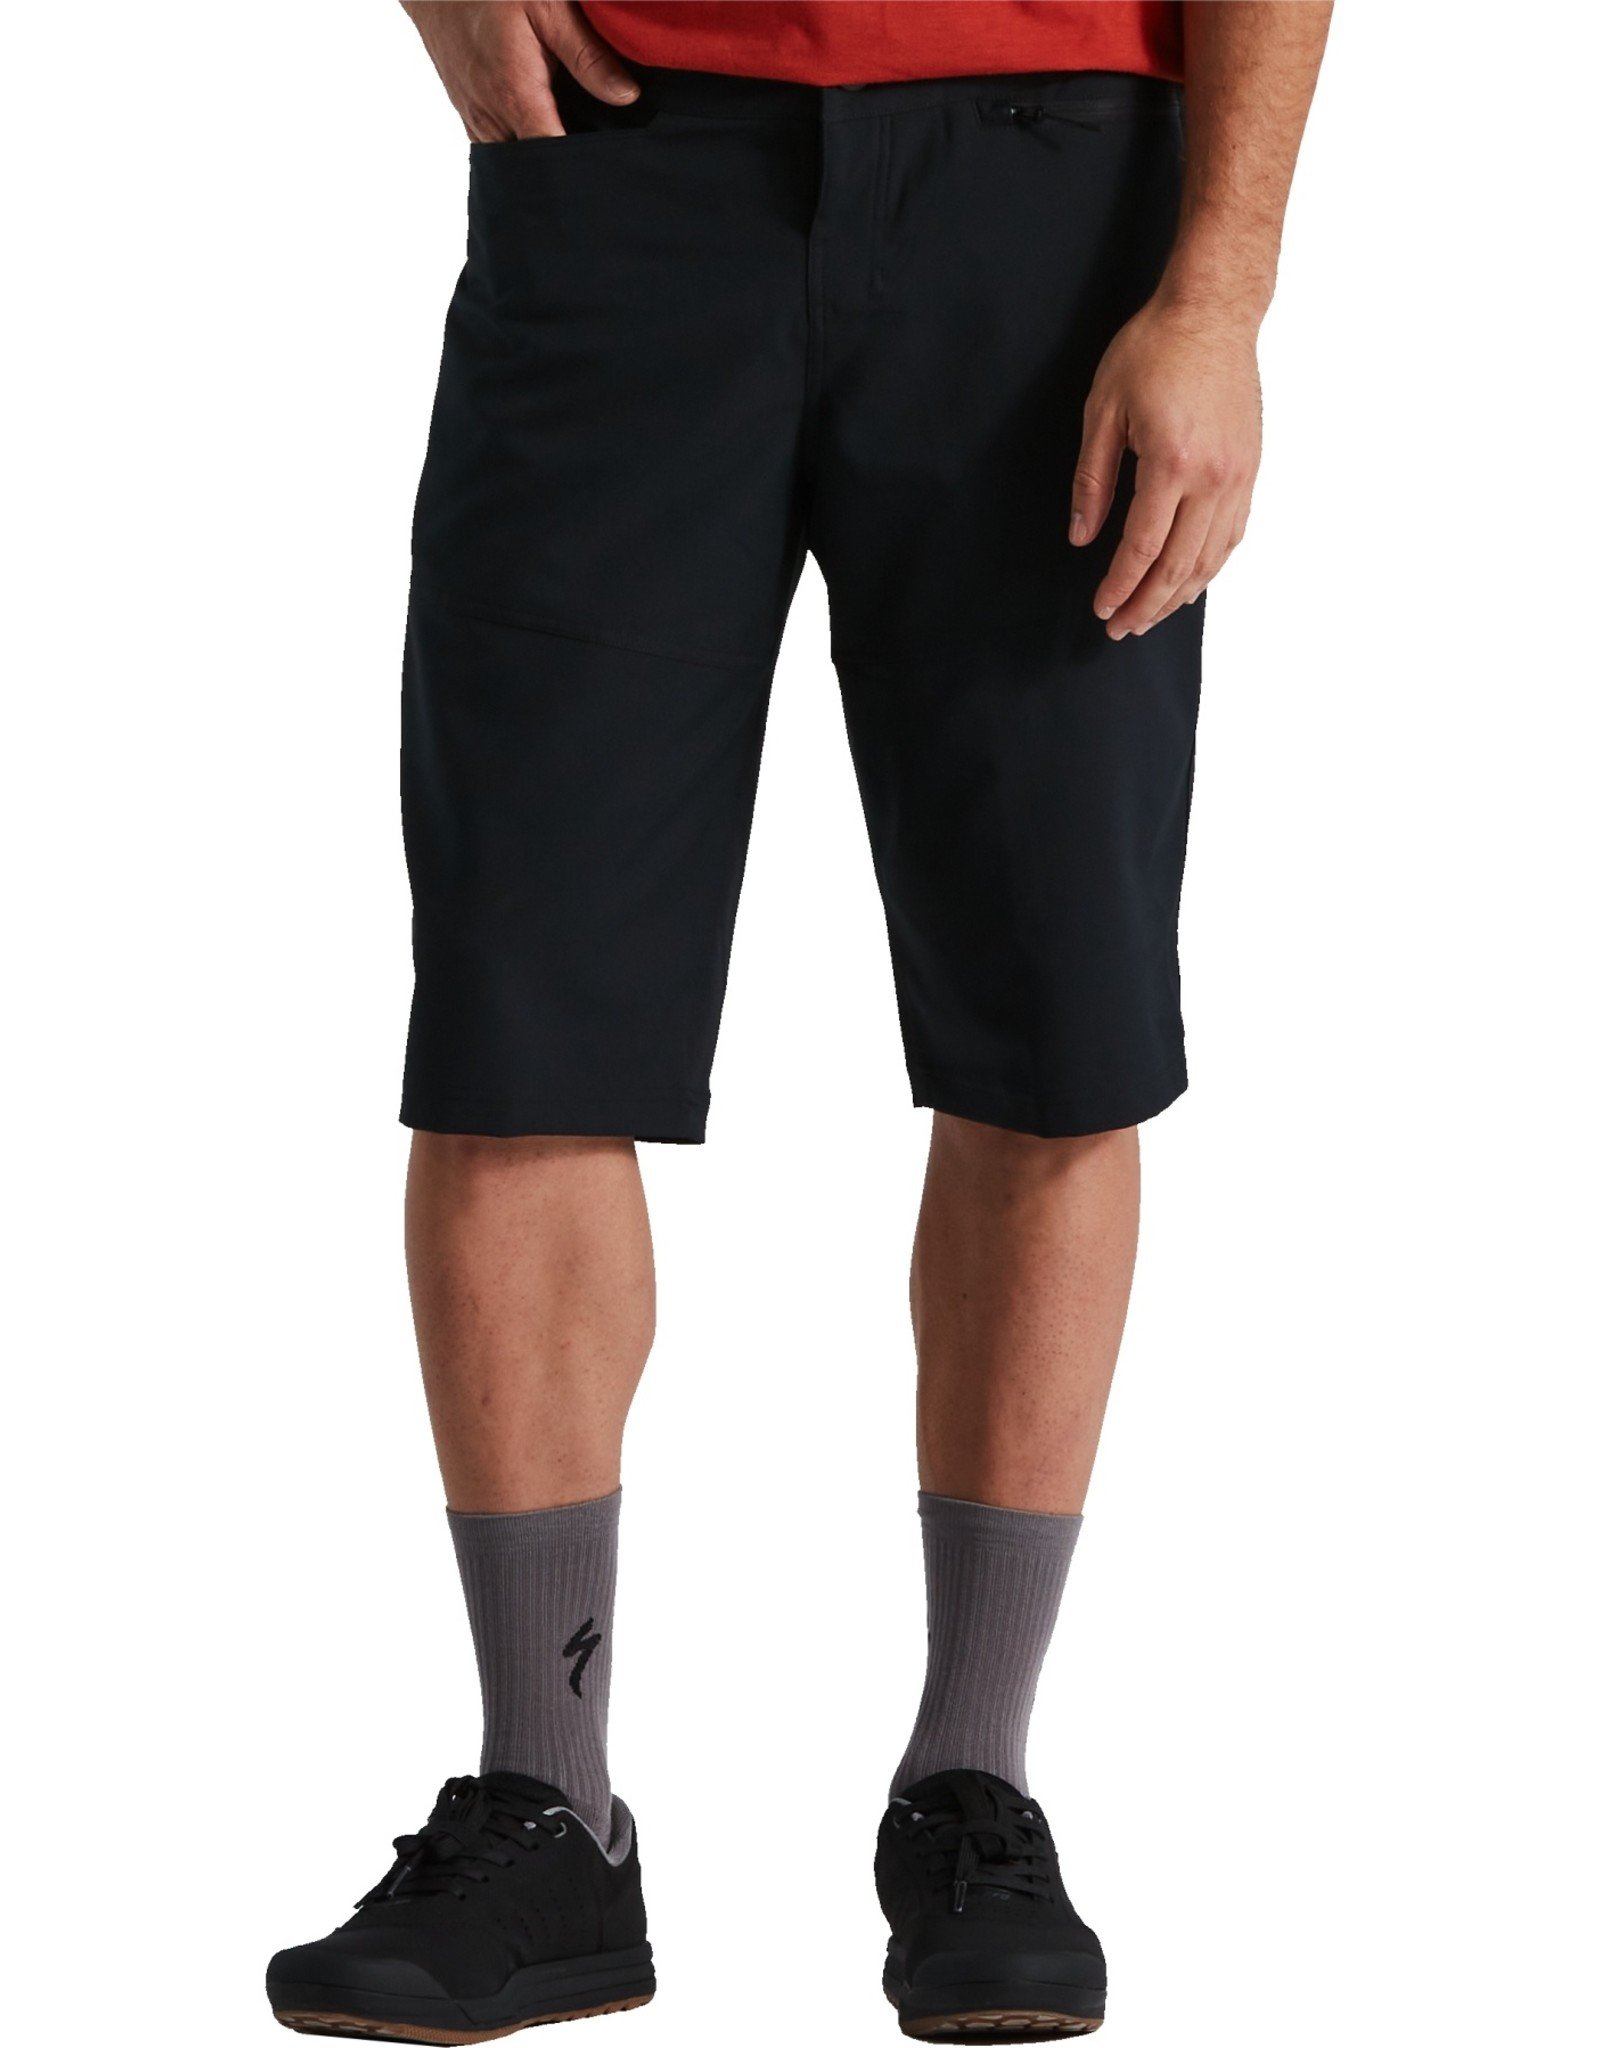 SPECIALIZED Men's Trail Short with Liner